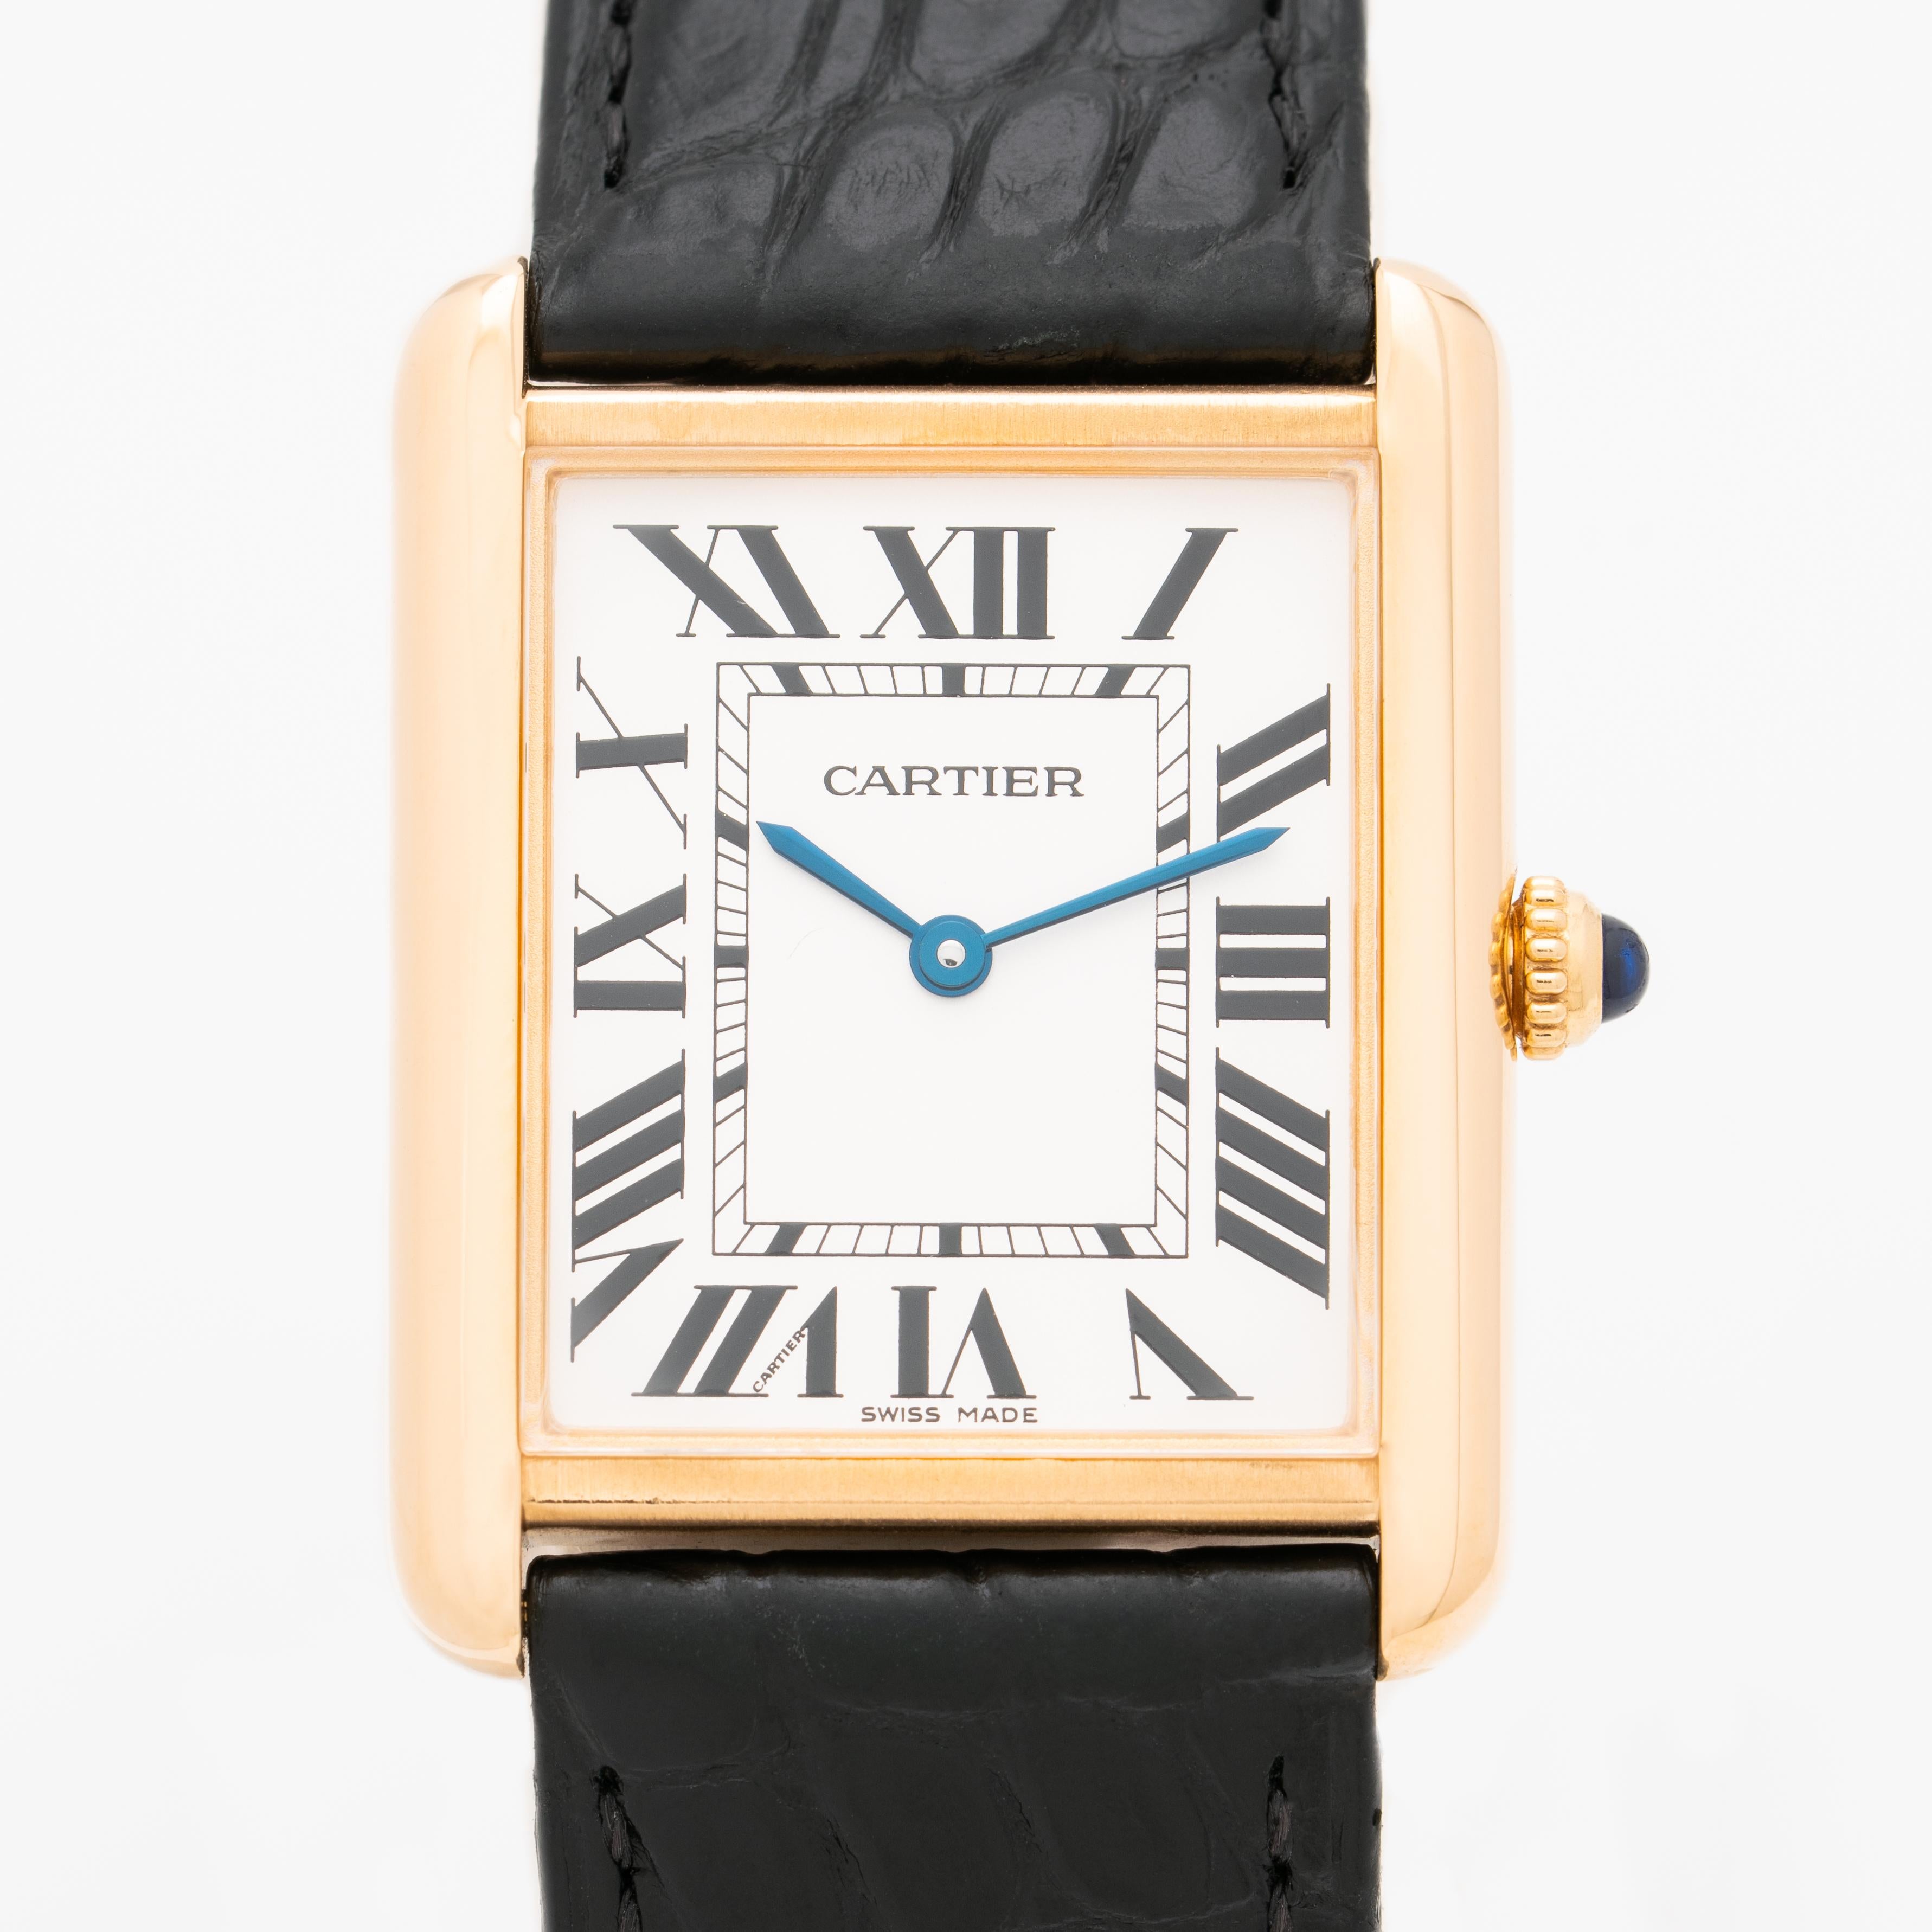 Cartier Model 3187 Tank Solo 18 Karat Yellow Gold and Stainless Steel Watch 
matte silvered dial signed CARTIER with secret signature at 7 o'clock, black Roman numerals, blued steel word hands, steel case back affixed by four screws, quartz